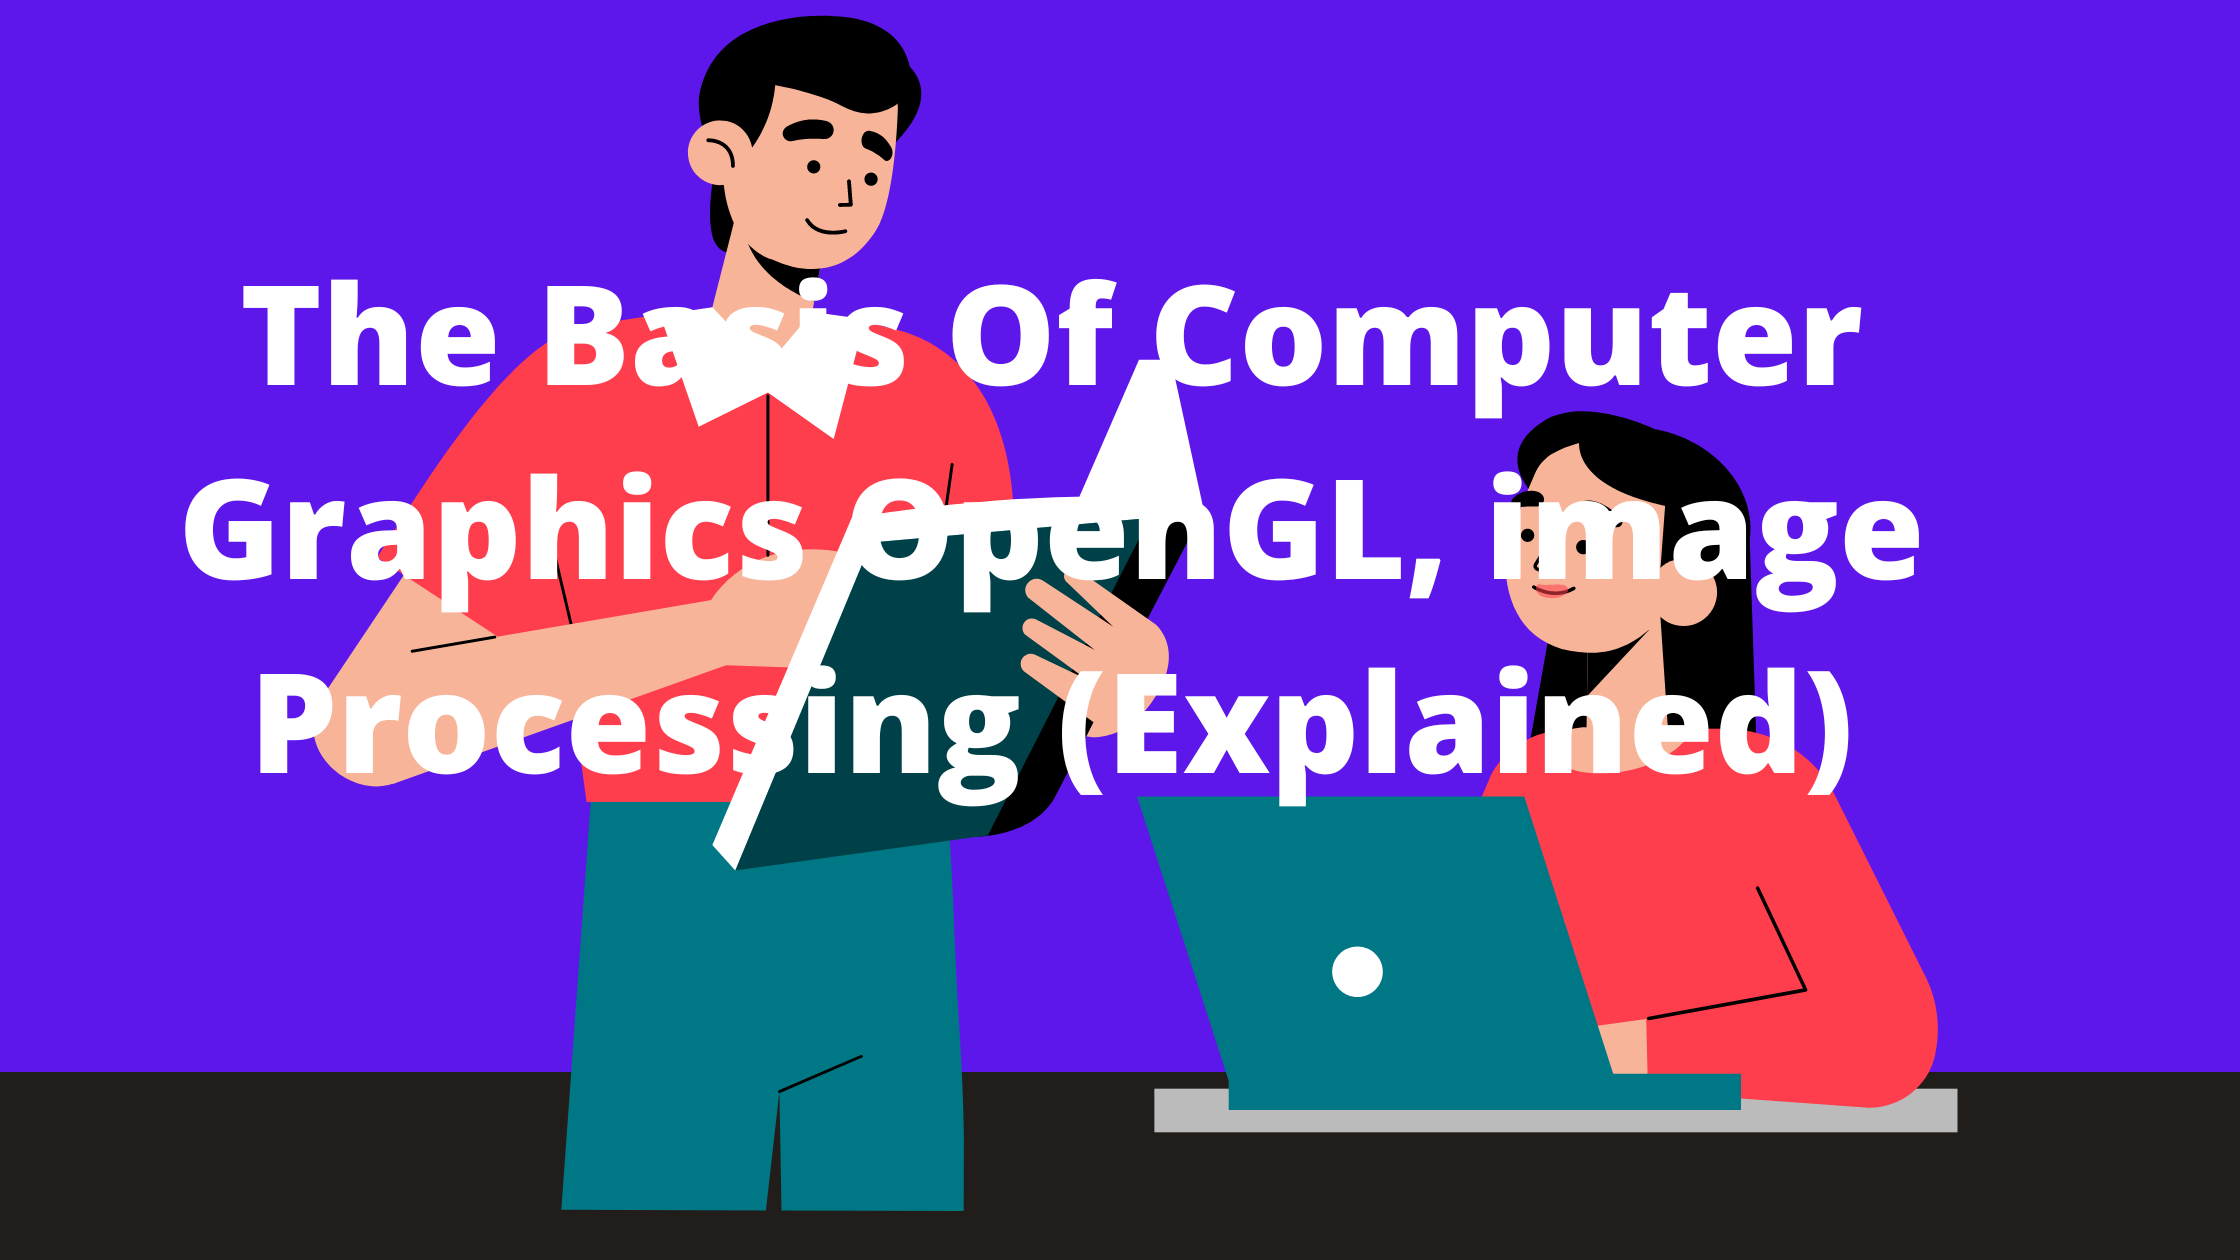 The Basis Of Computer Graphics OpenGL, image Processing (Explained)